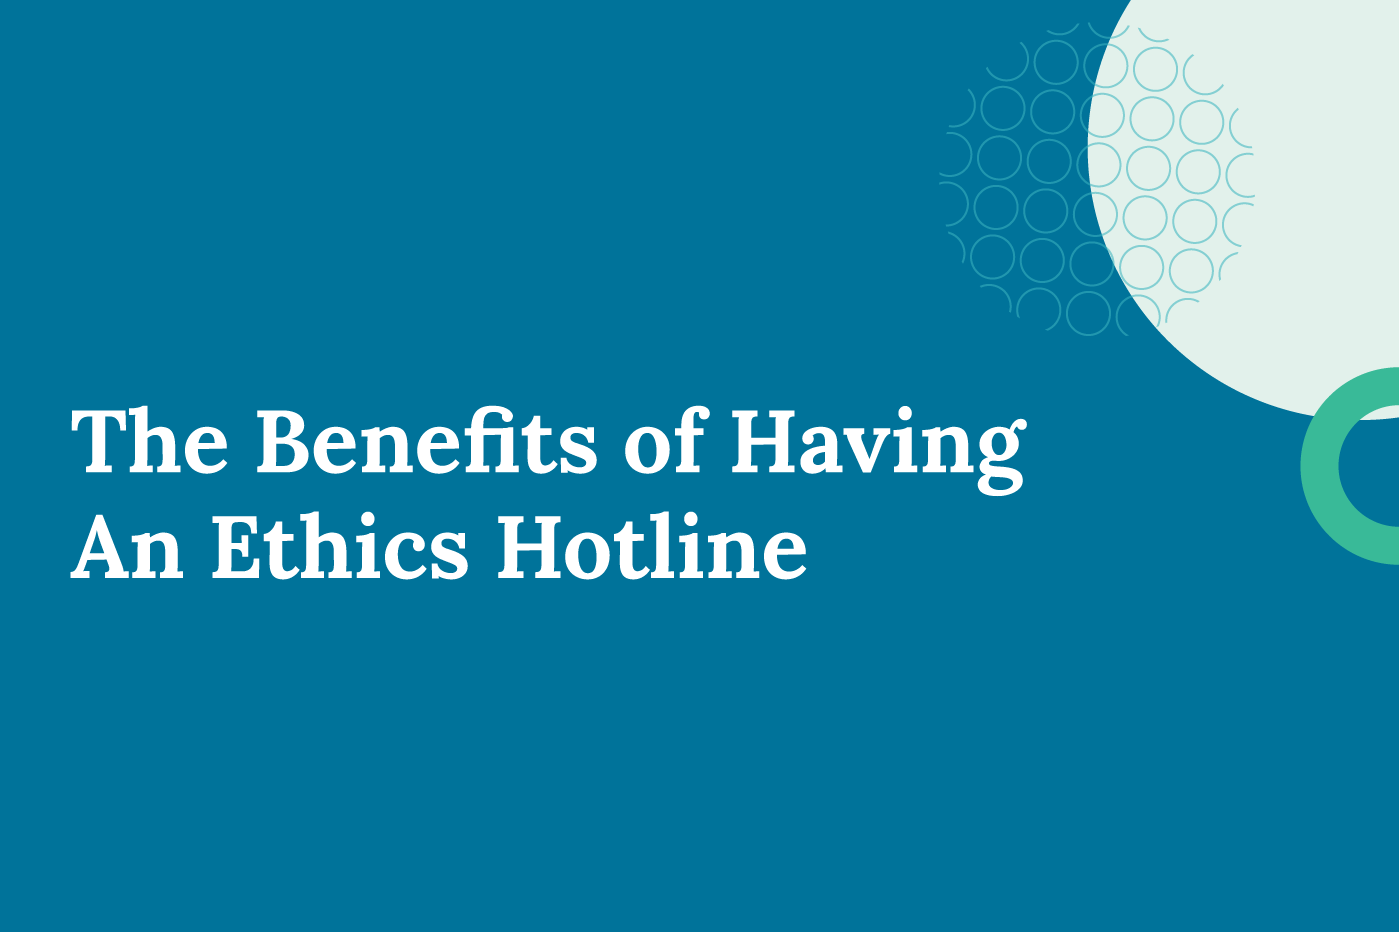 The Benefits of Having (and Promoting) an Ethics Hotline